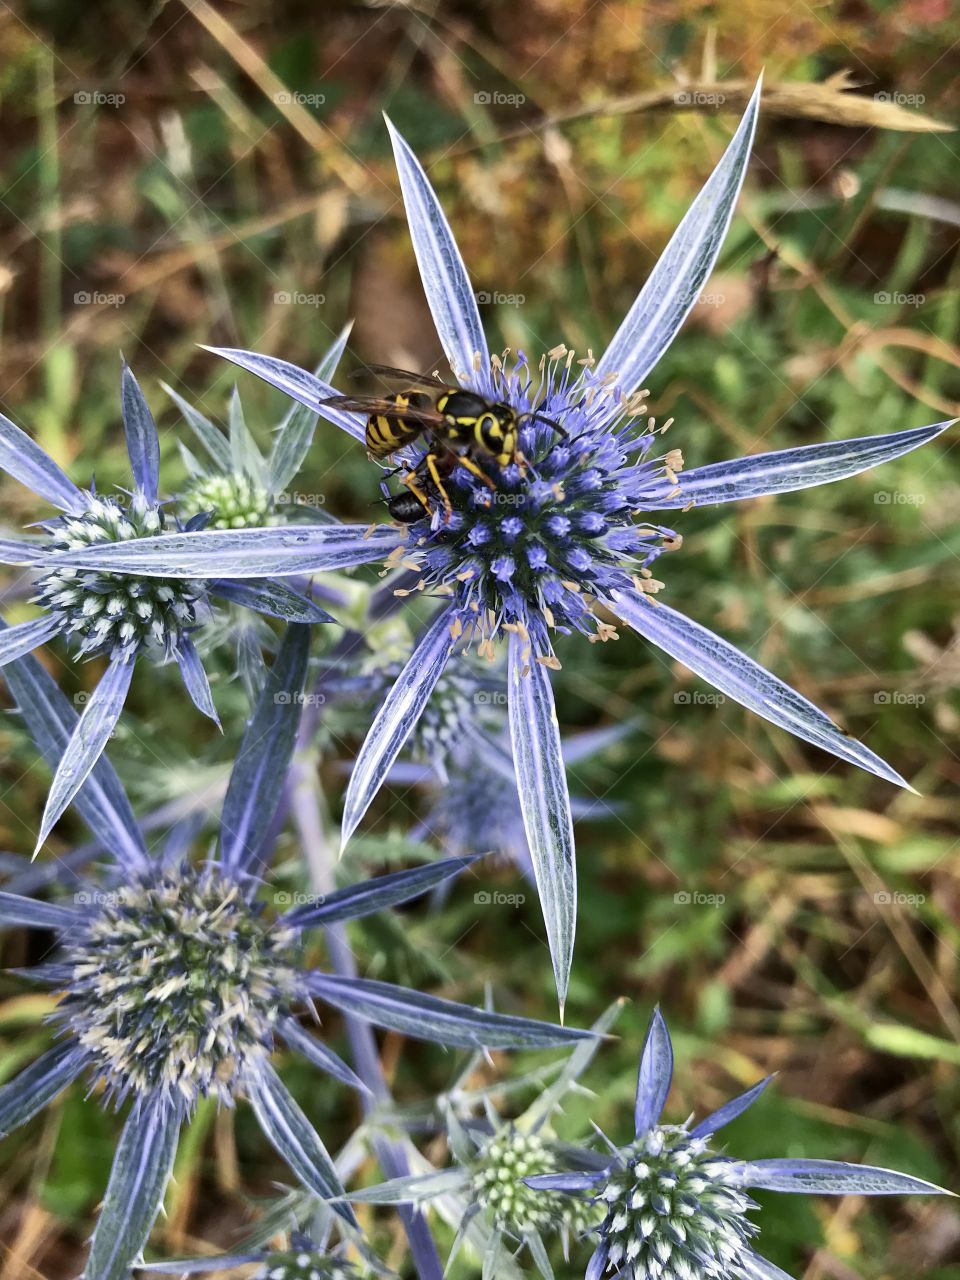 This Sea Holly (Eryngium bourgatii) is native to the Canadian West Coast & blooms summer to fall. The Yellow Jacket Wasp (Vespula pensylvanica) shown is drinking nectar & can be beneficial helping to control harmful plant eating insects of crops. 